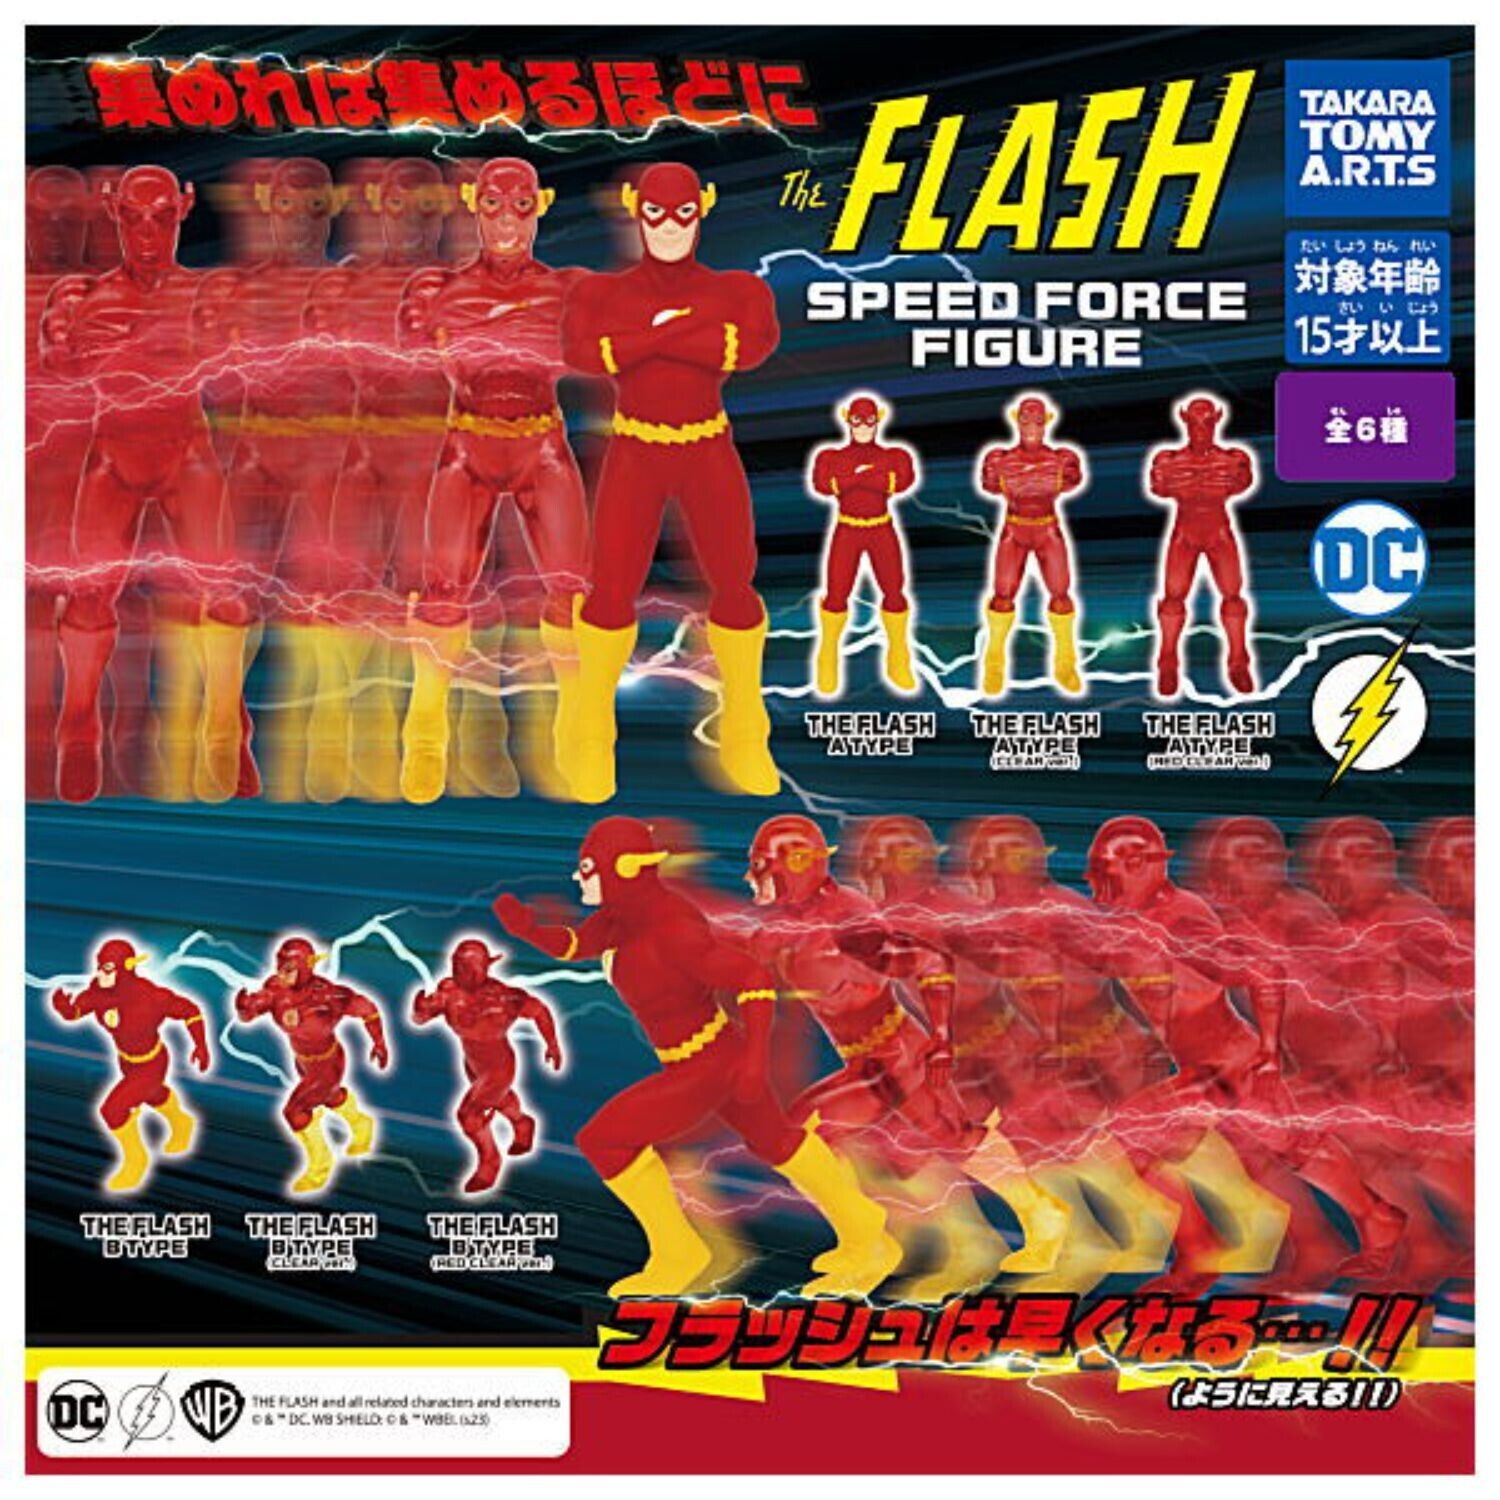 THE FLASH SPEED FORCE FIGURE Capsule Toy 6 Types Full Comp Set Gacha New Japan